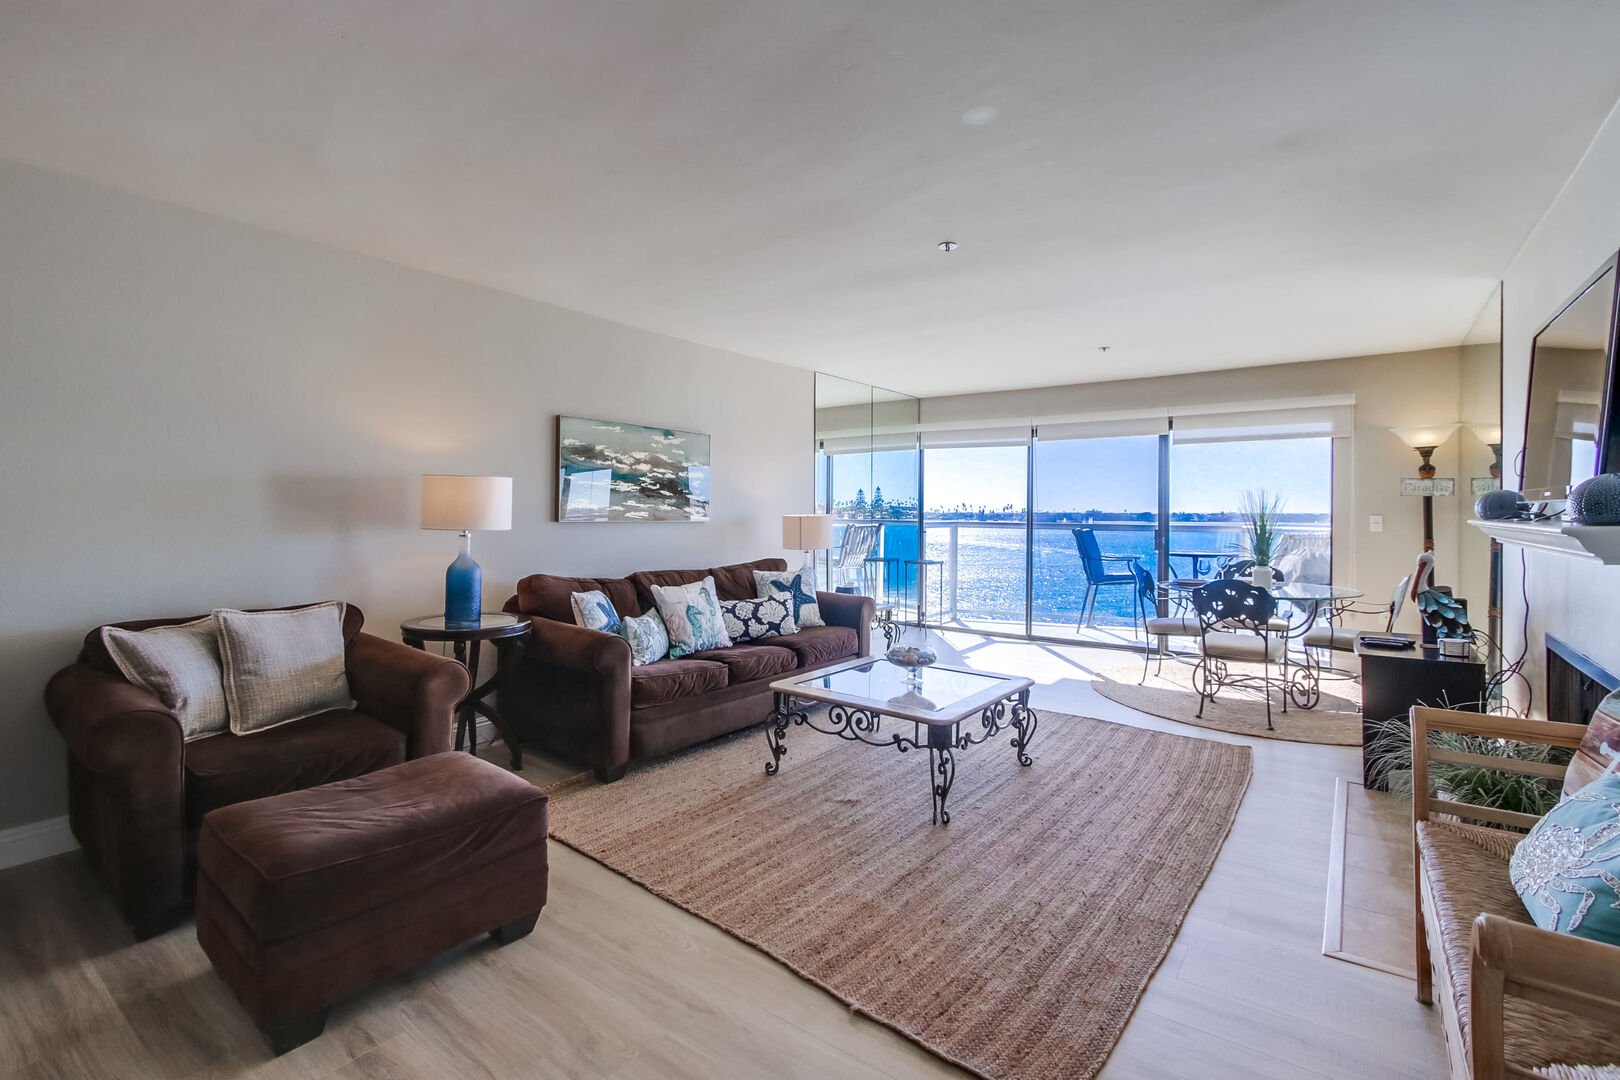 Open, bright living space with NEW FLOORS and an unbeatable view of beautiful Mission Bay!